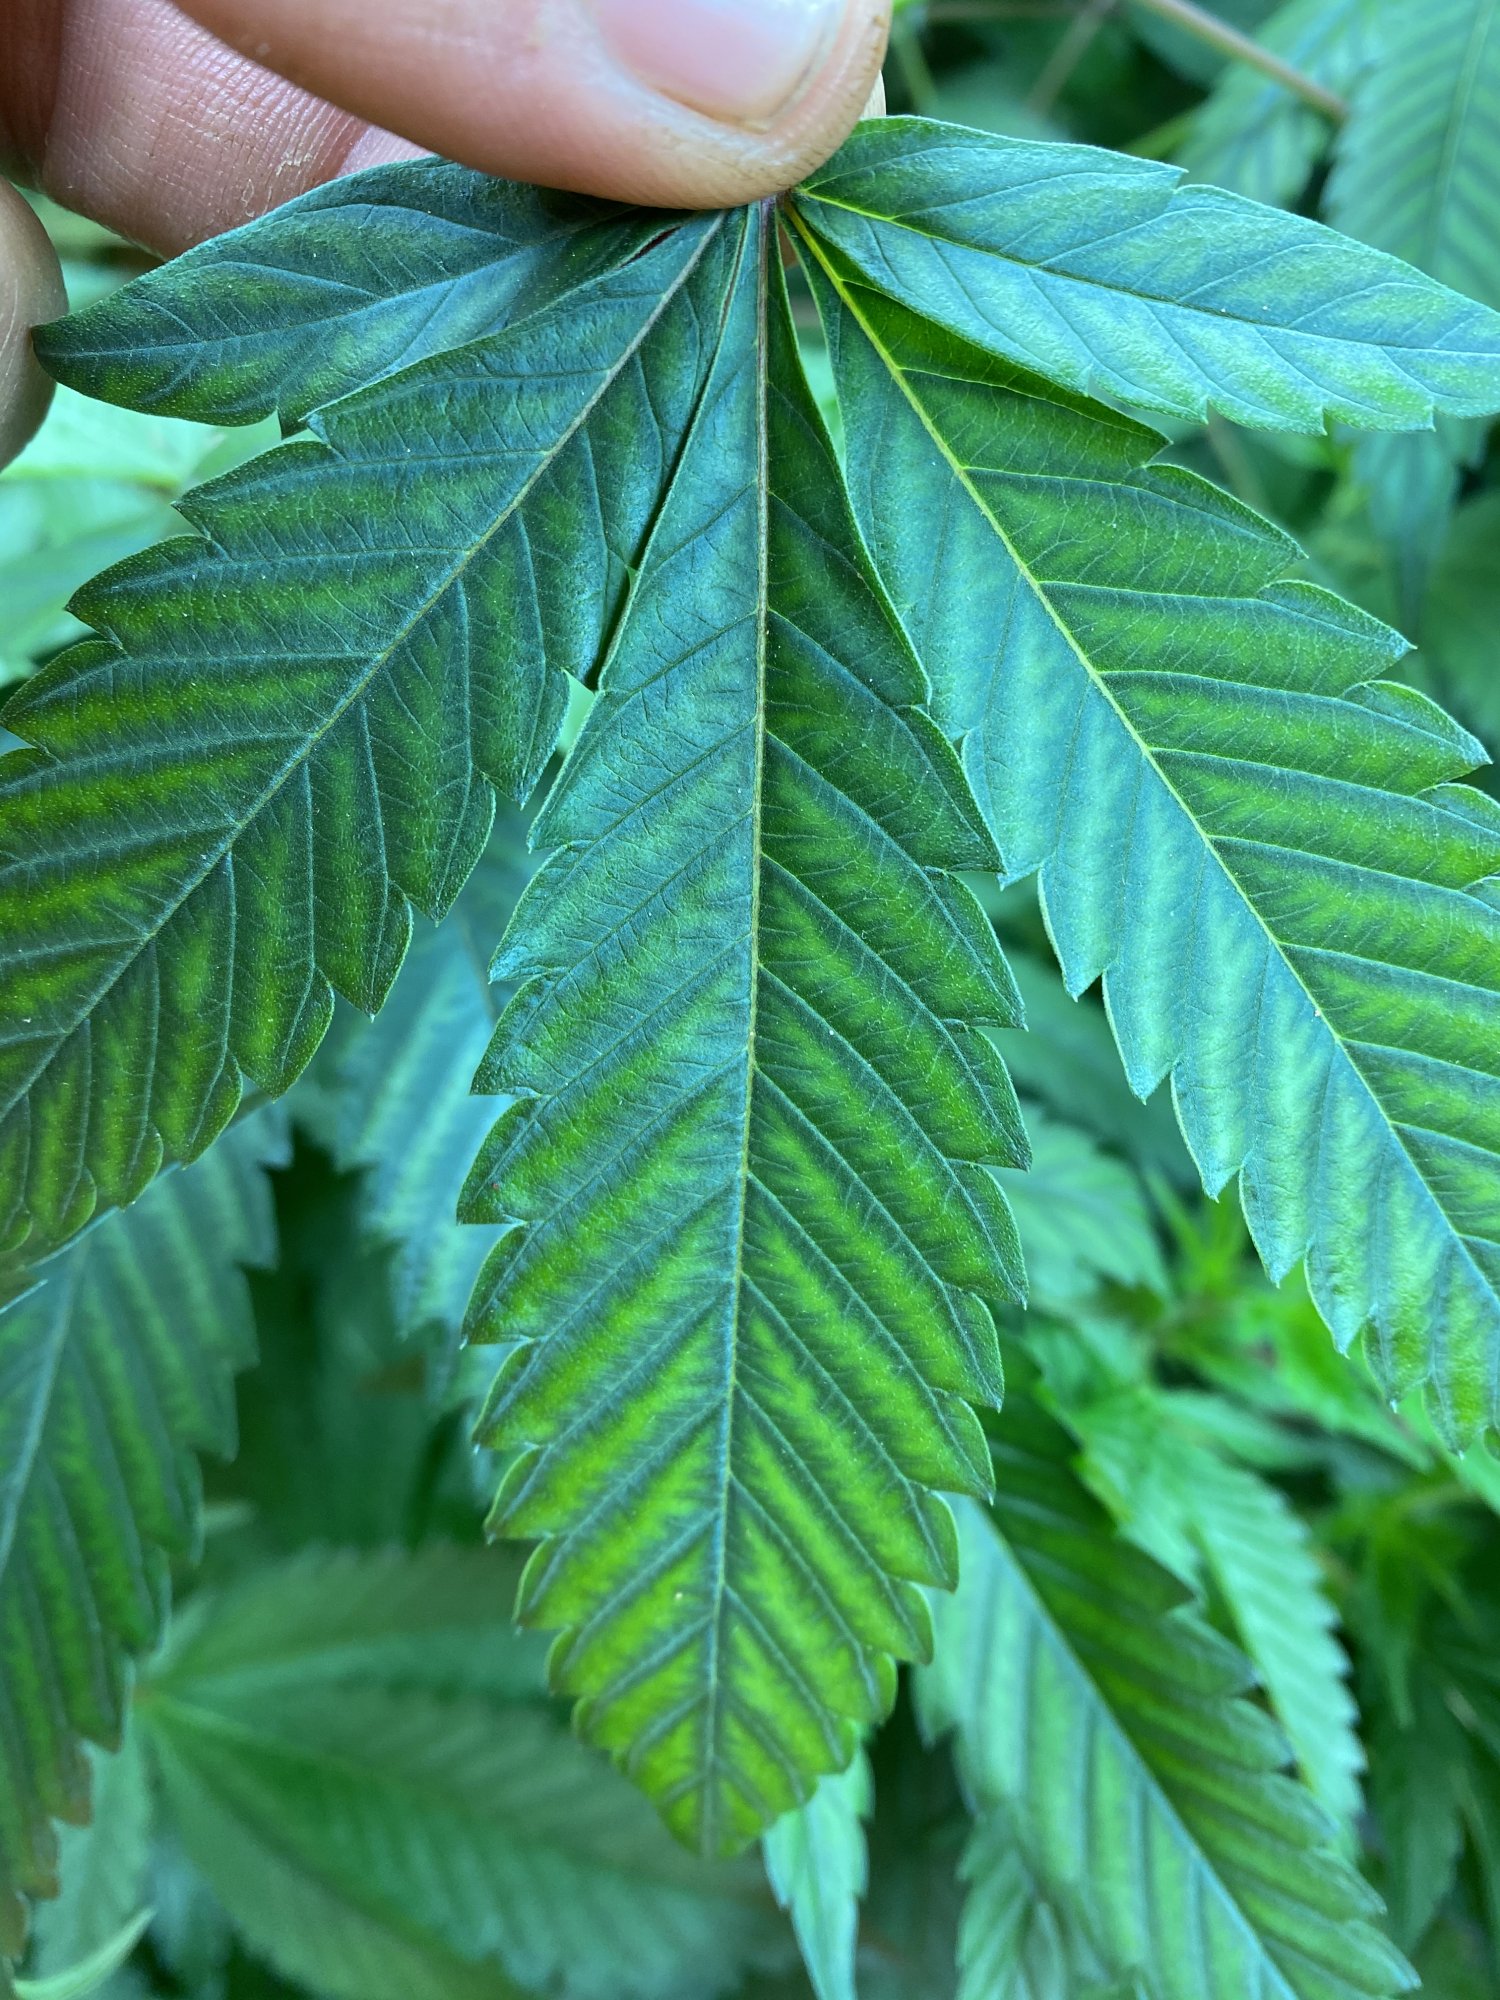 Second opinion on deficiency 4